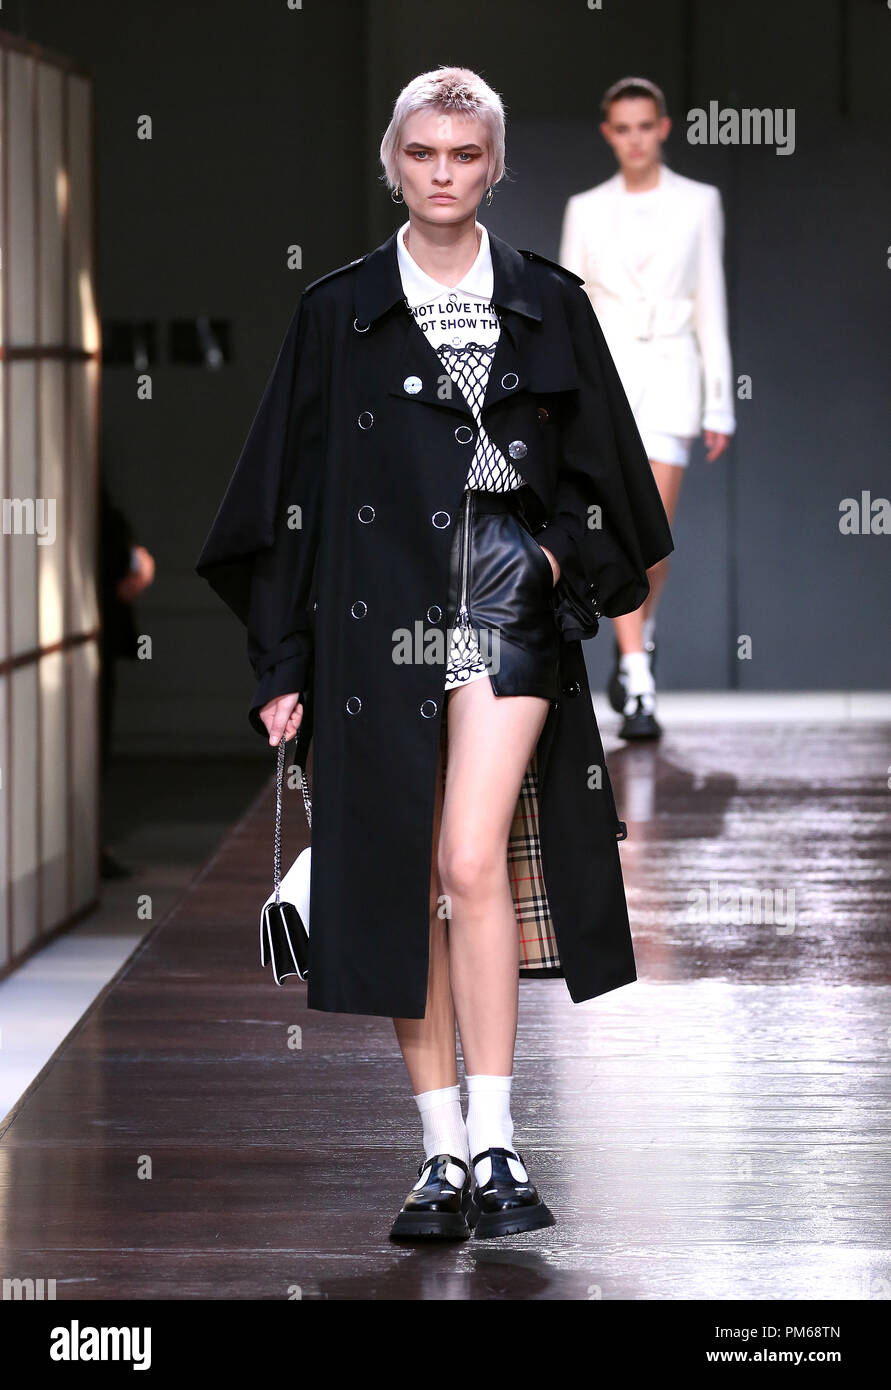 Models on the catwalk during the Burberry London Fashion Week SS19 show  held at The South London Mail Centre Stock Photo - Alamy